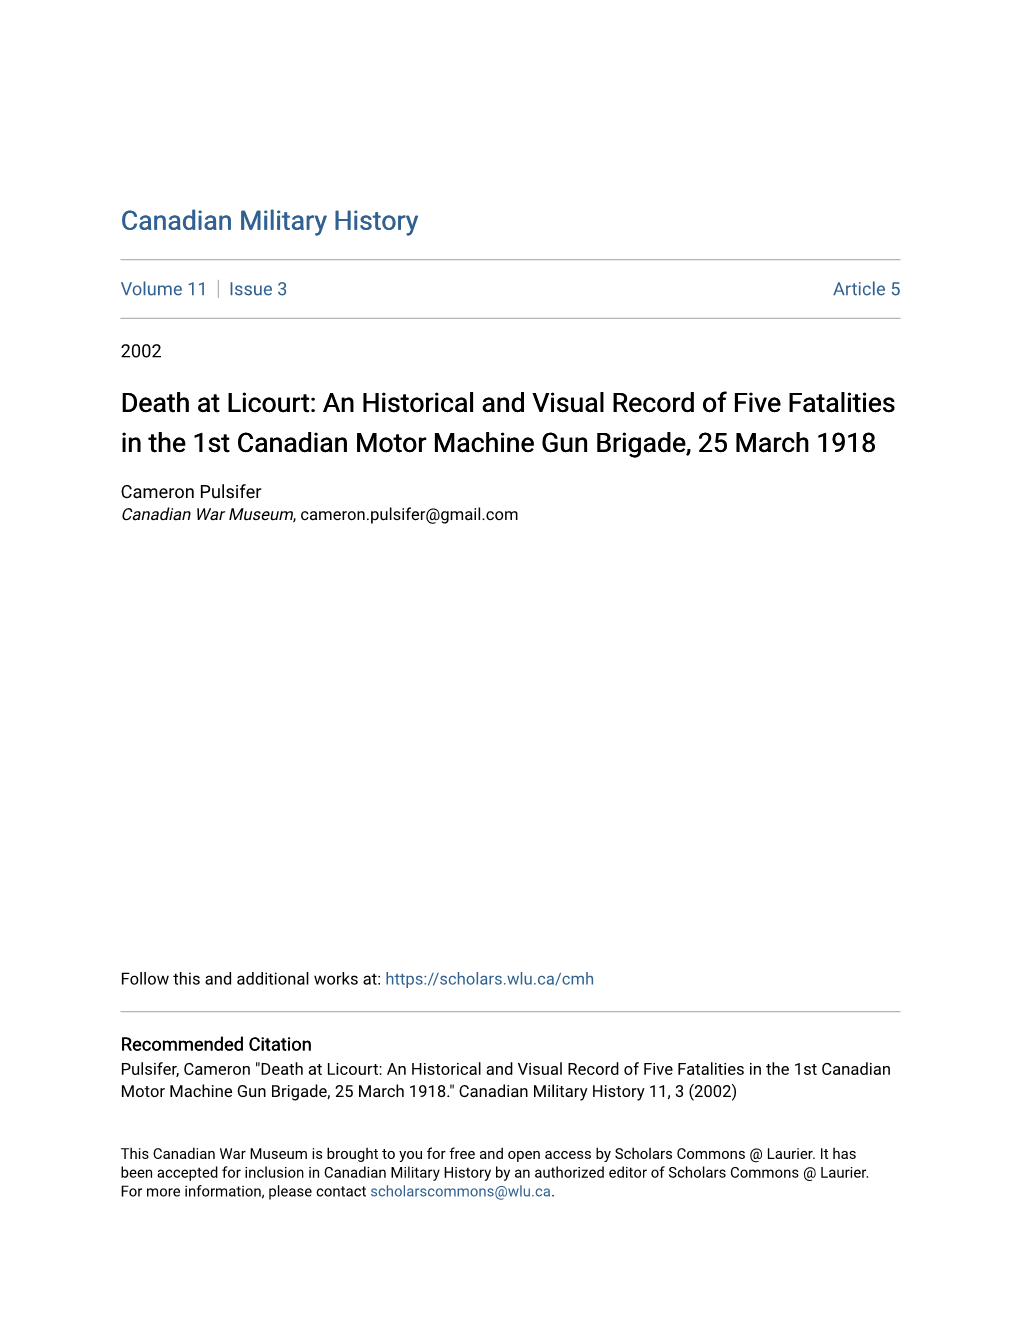 Death at Licourt: an Historical and Visual Record of Five Fatalities in the 1St Canadian Motor Machine Gun Brigade, 25 March 1918